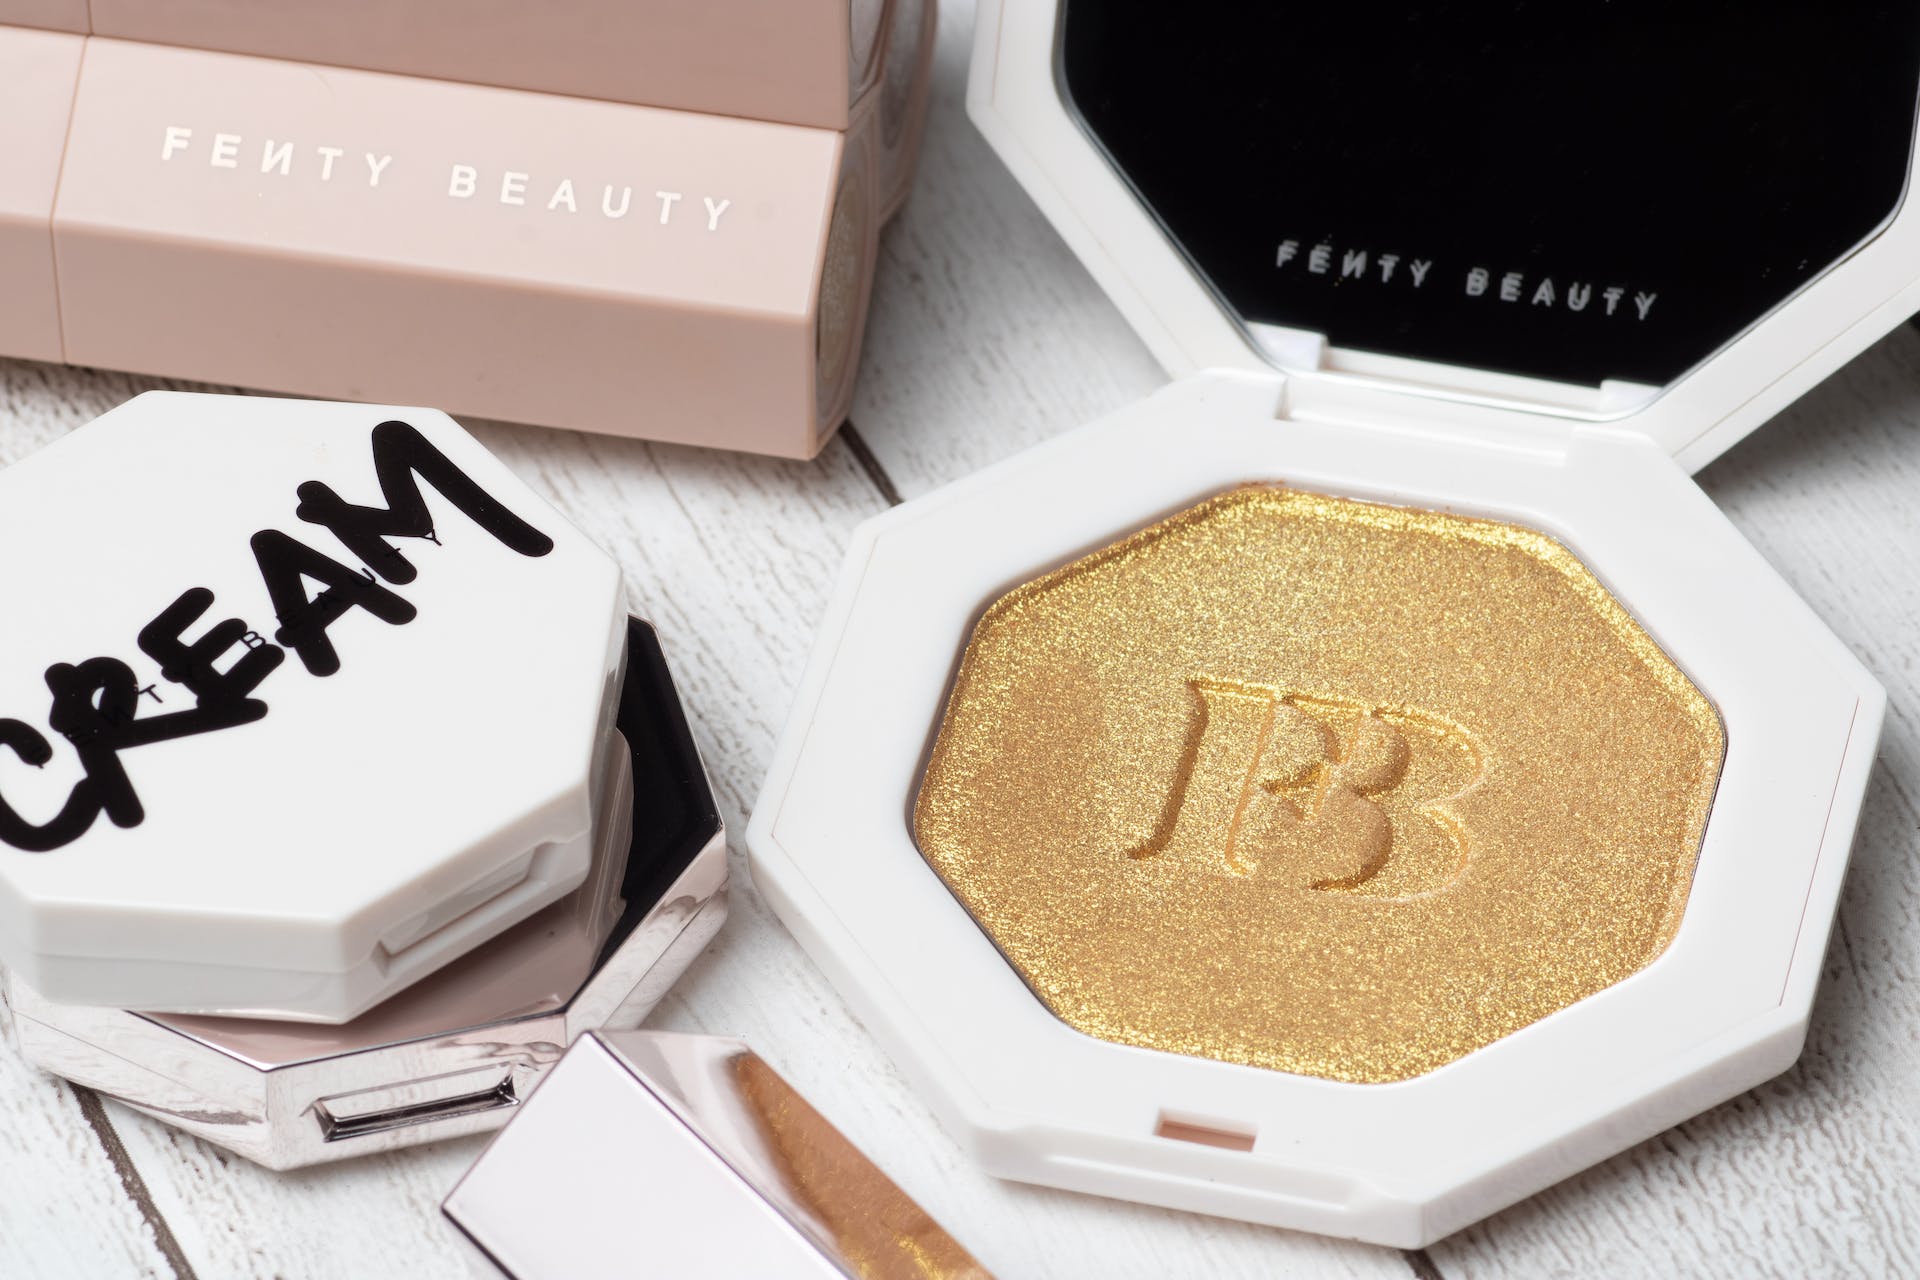 A glimpse of Rihanna's Fenty Beauty success with products on display, including a shimmering gold highlighter with the FB emblem.